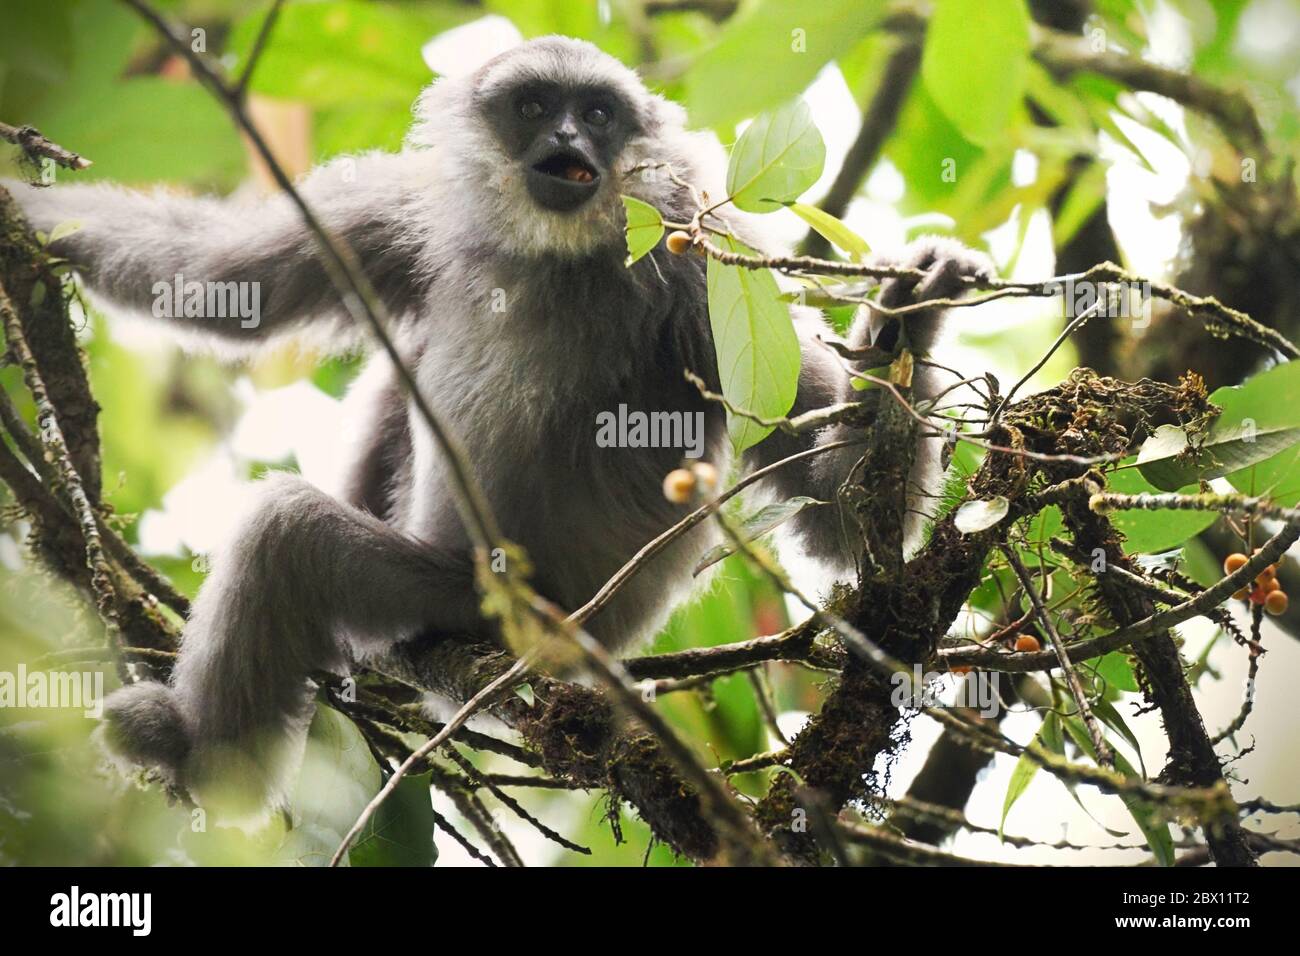 A Javan gibbon (Hylobates moloch, silvery gibbon) eating fruits of a fig tree in Gunung Halimun Salak National Park in West Java, Indonesia. Stock Photo